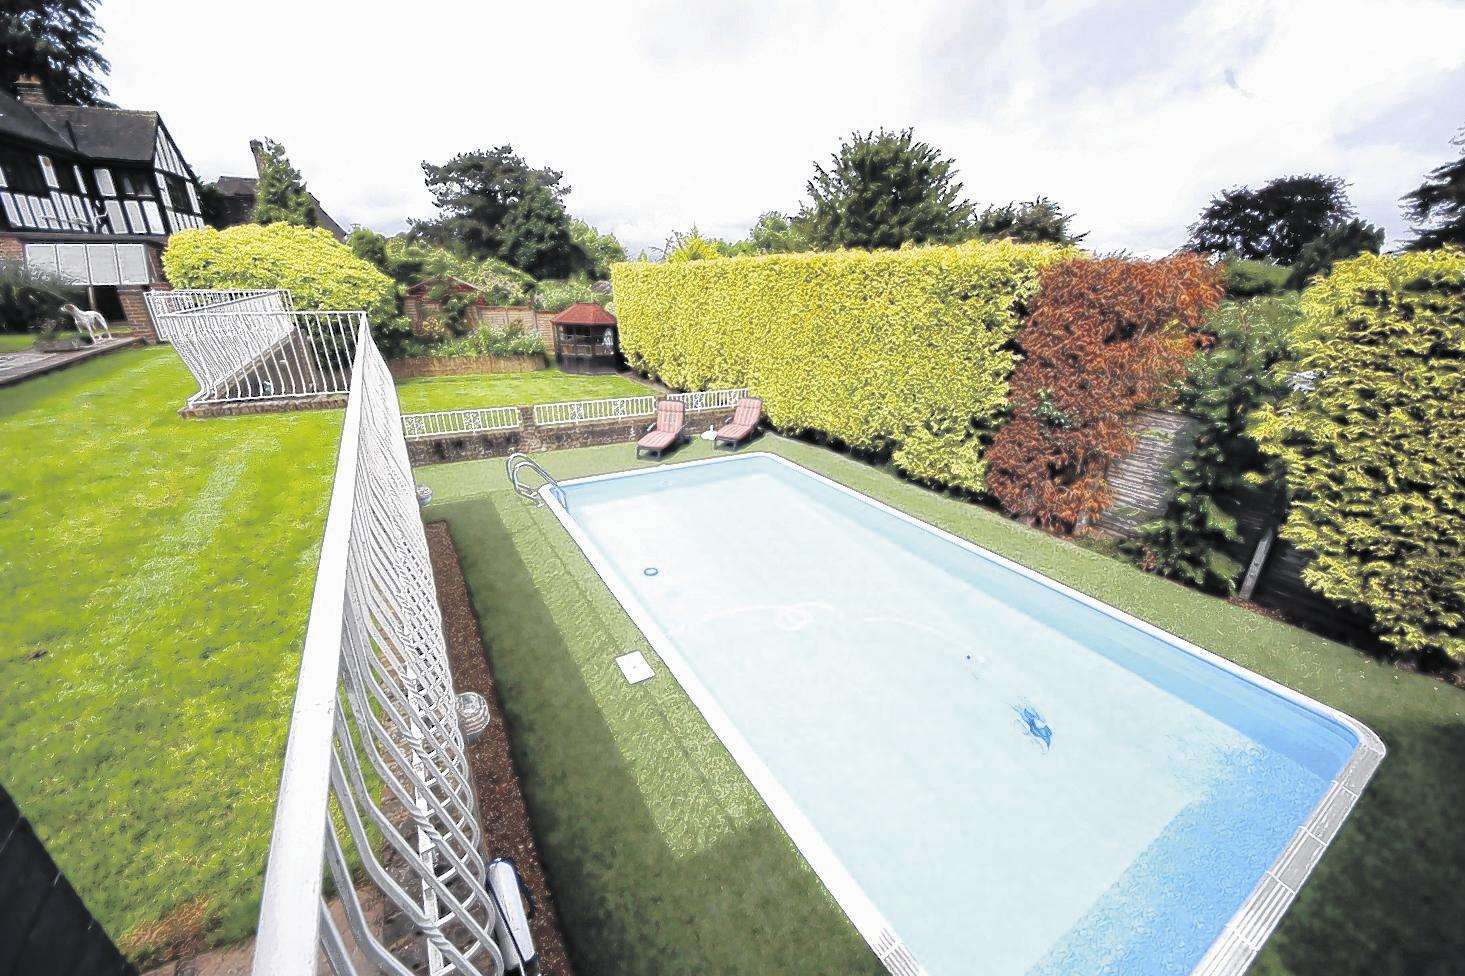 The swimming pool at the property in Penenden Heath